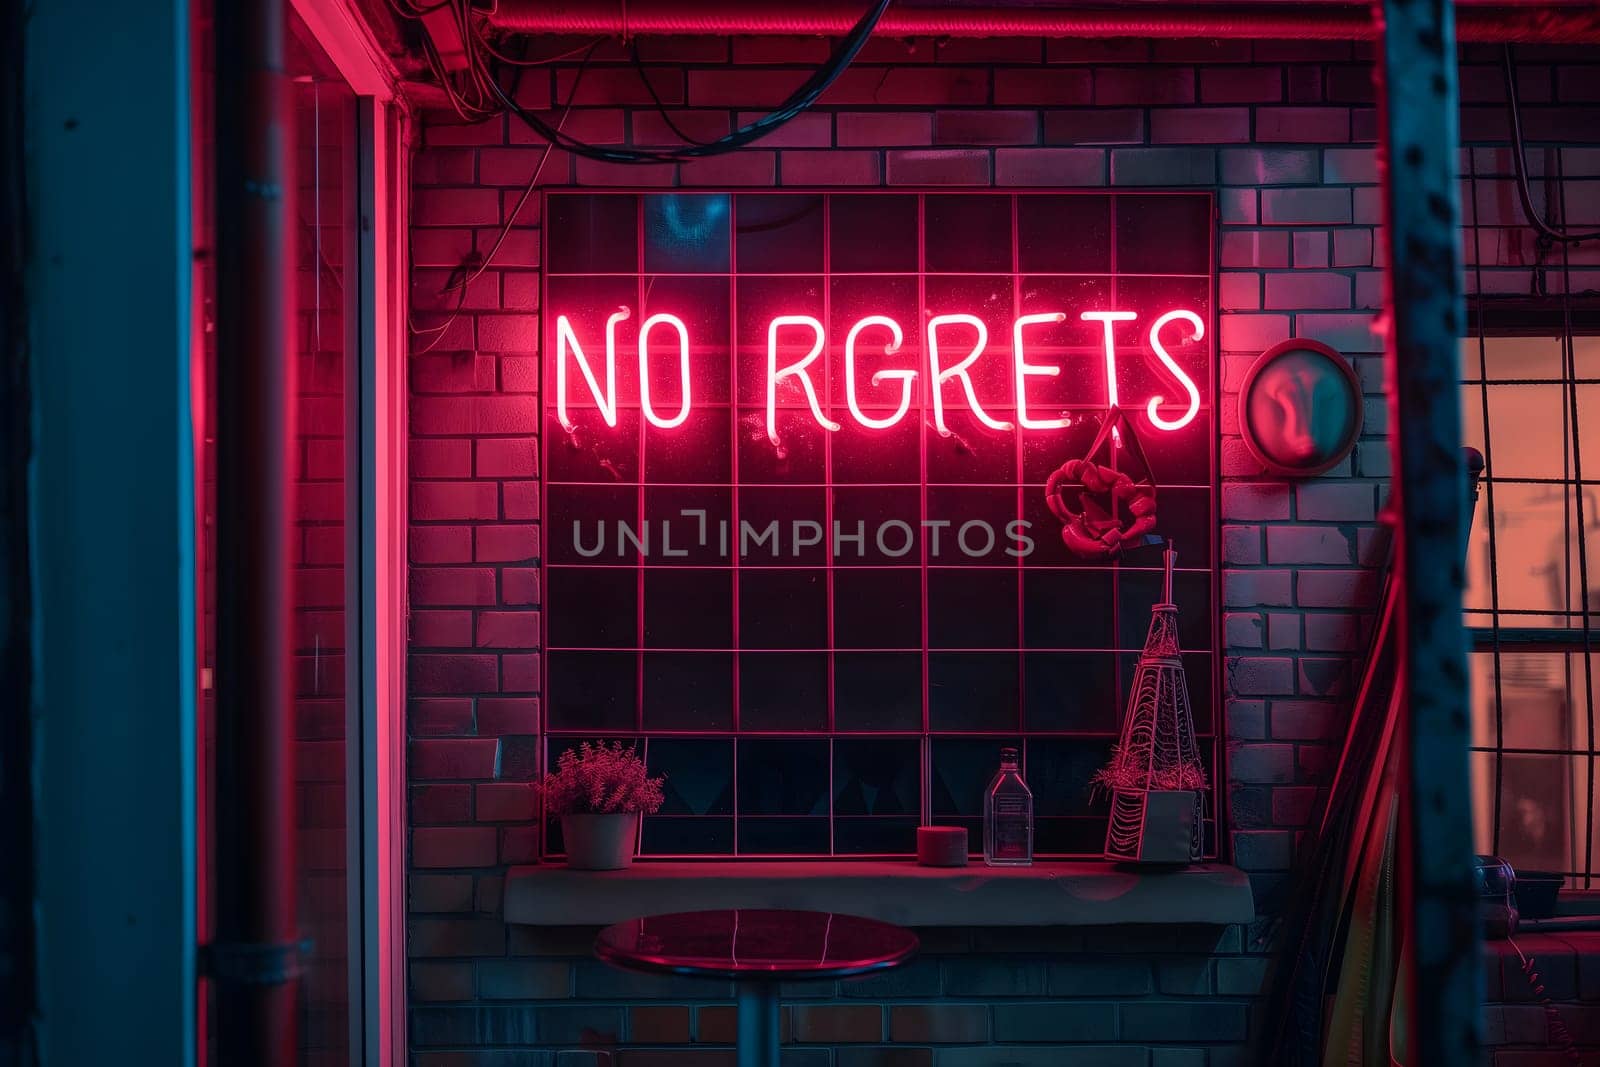 A neon sign that says NO REGRETS on a brick wall. Neural network generated image. Not based on any actual scene or pattern.